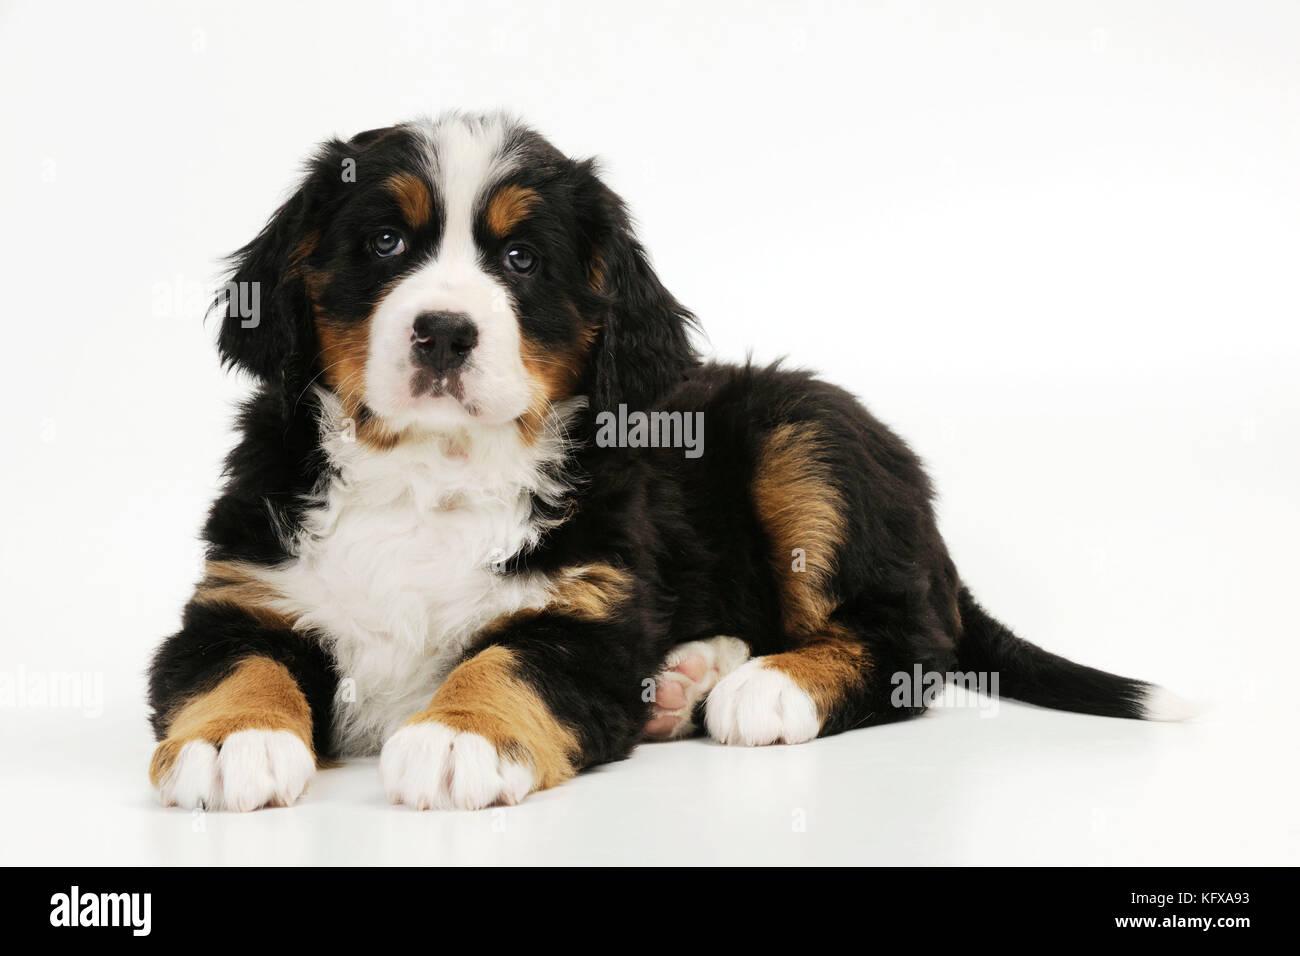 DOG. Bernese mountain puppy lying down. Also known as Berner Sennenhund. Stock Photo